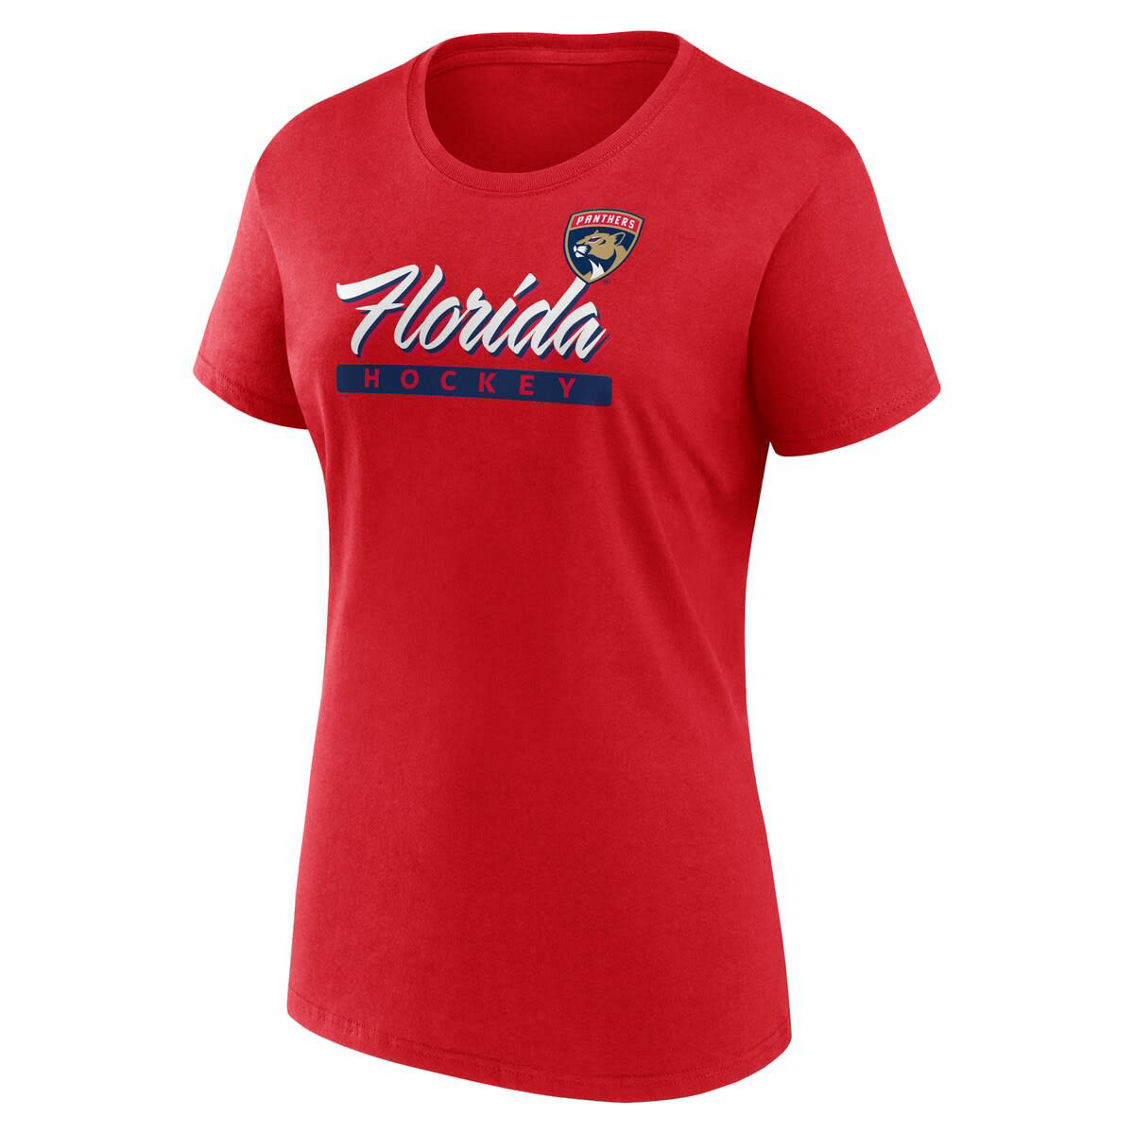 Fanatics Branded Women's Florida Panthers Risk T-Shirt Combo Pack - Image 3 of 4